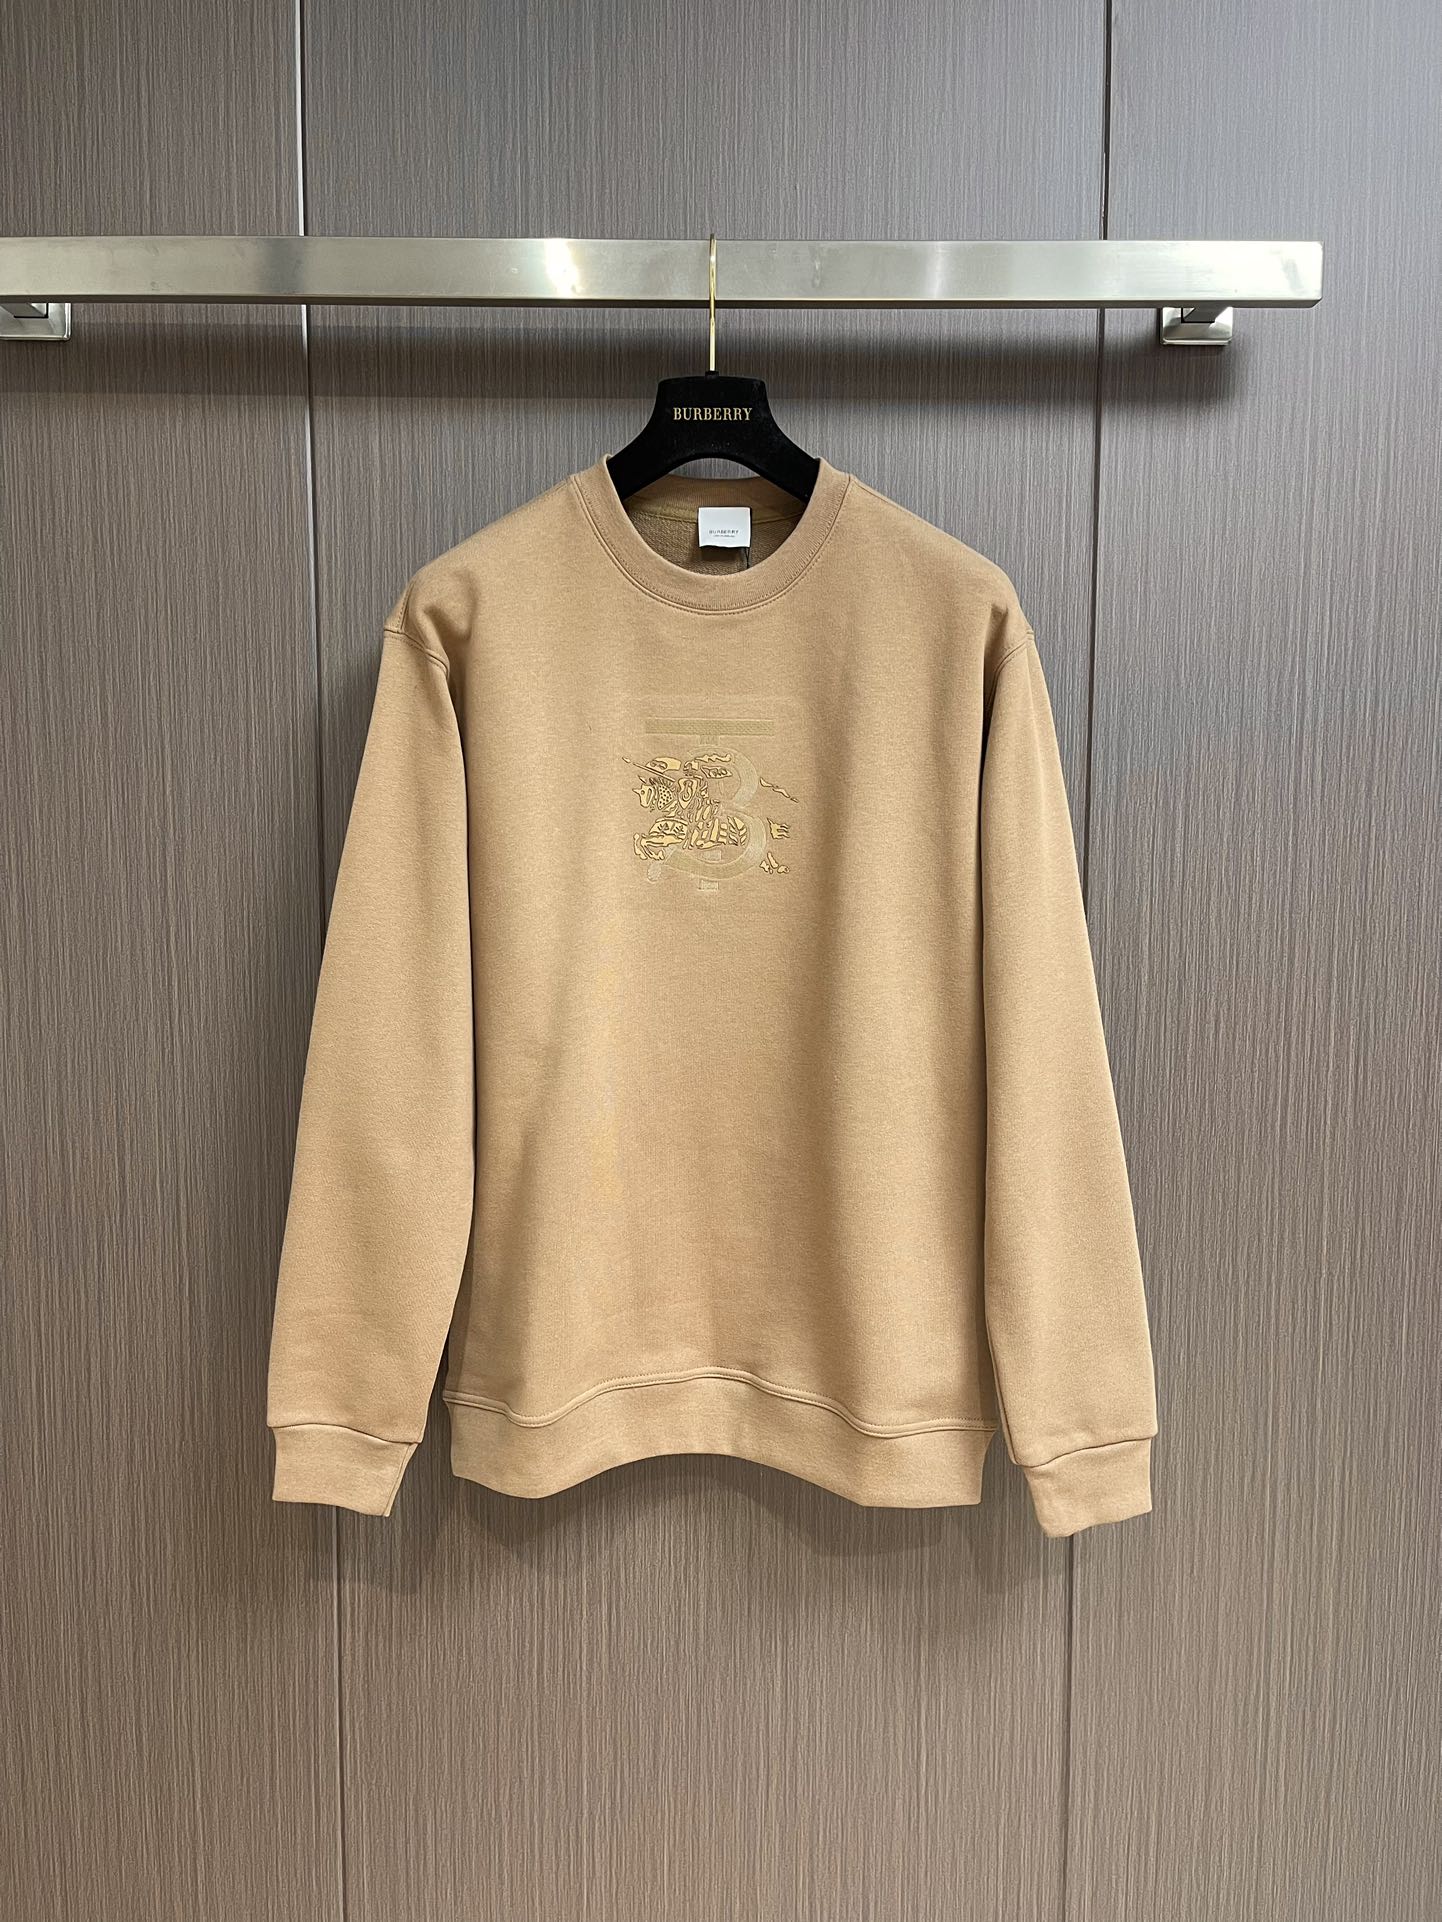 Burberry AAAAA
 Clothing Sweatshirts Embroidery Unisex Cotton Fall/Winter Collection